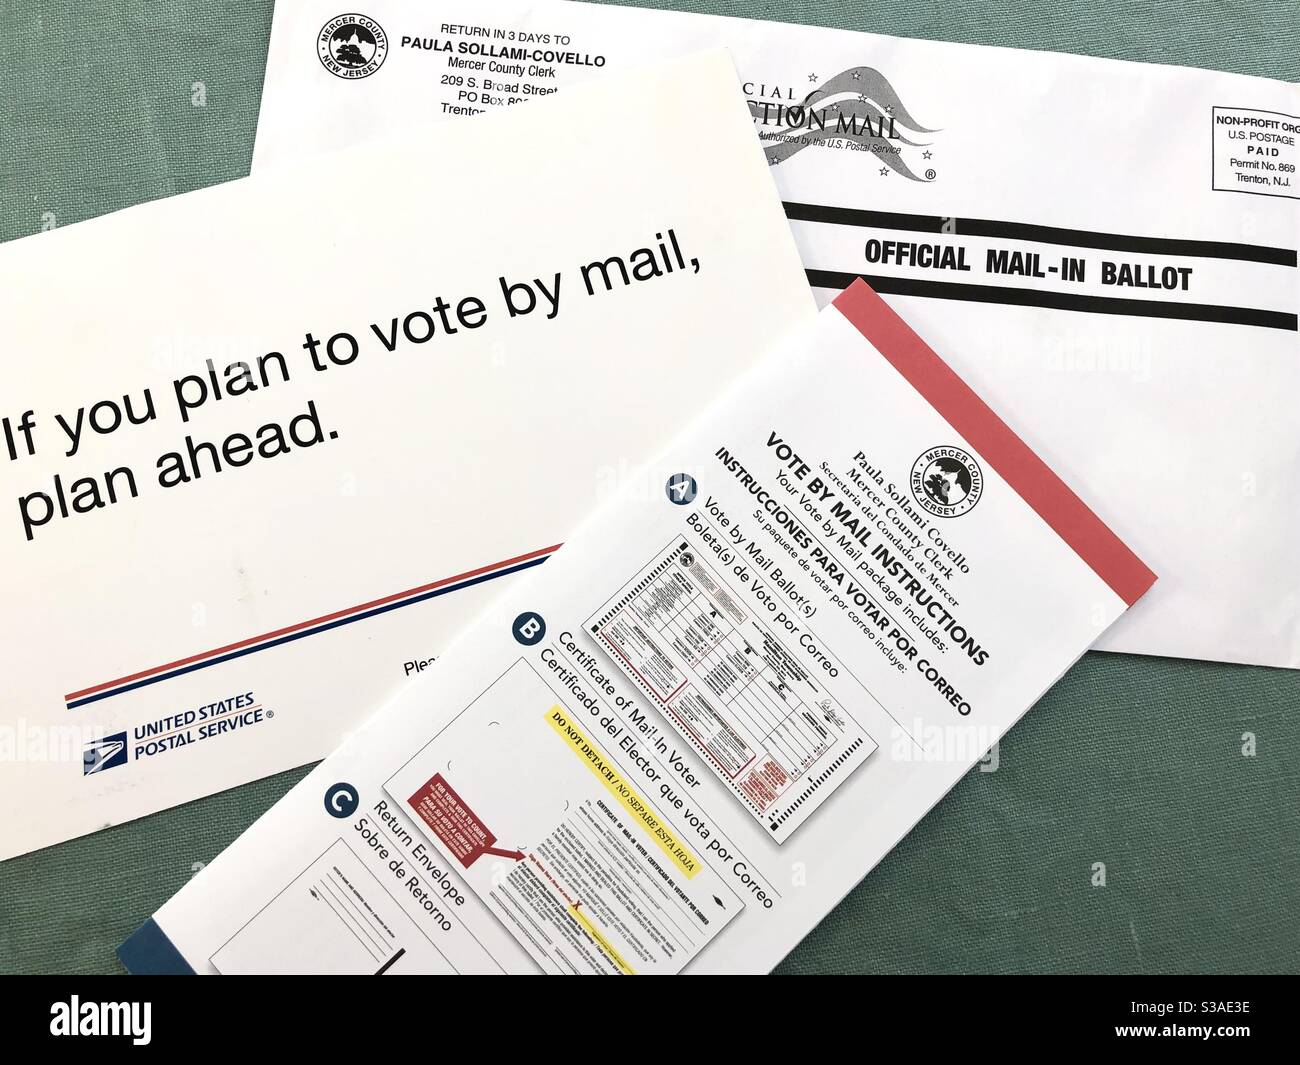 Princeton, NJ -14 OCT 2020- View of mail in ballots in New Jersey for the 2020 election in the United States. Stock Photo